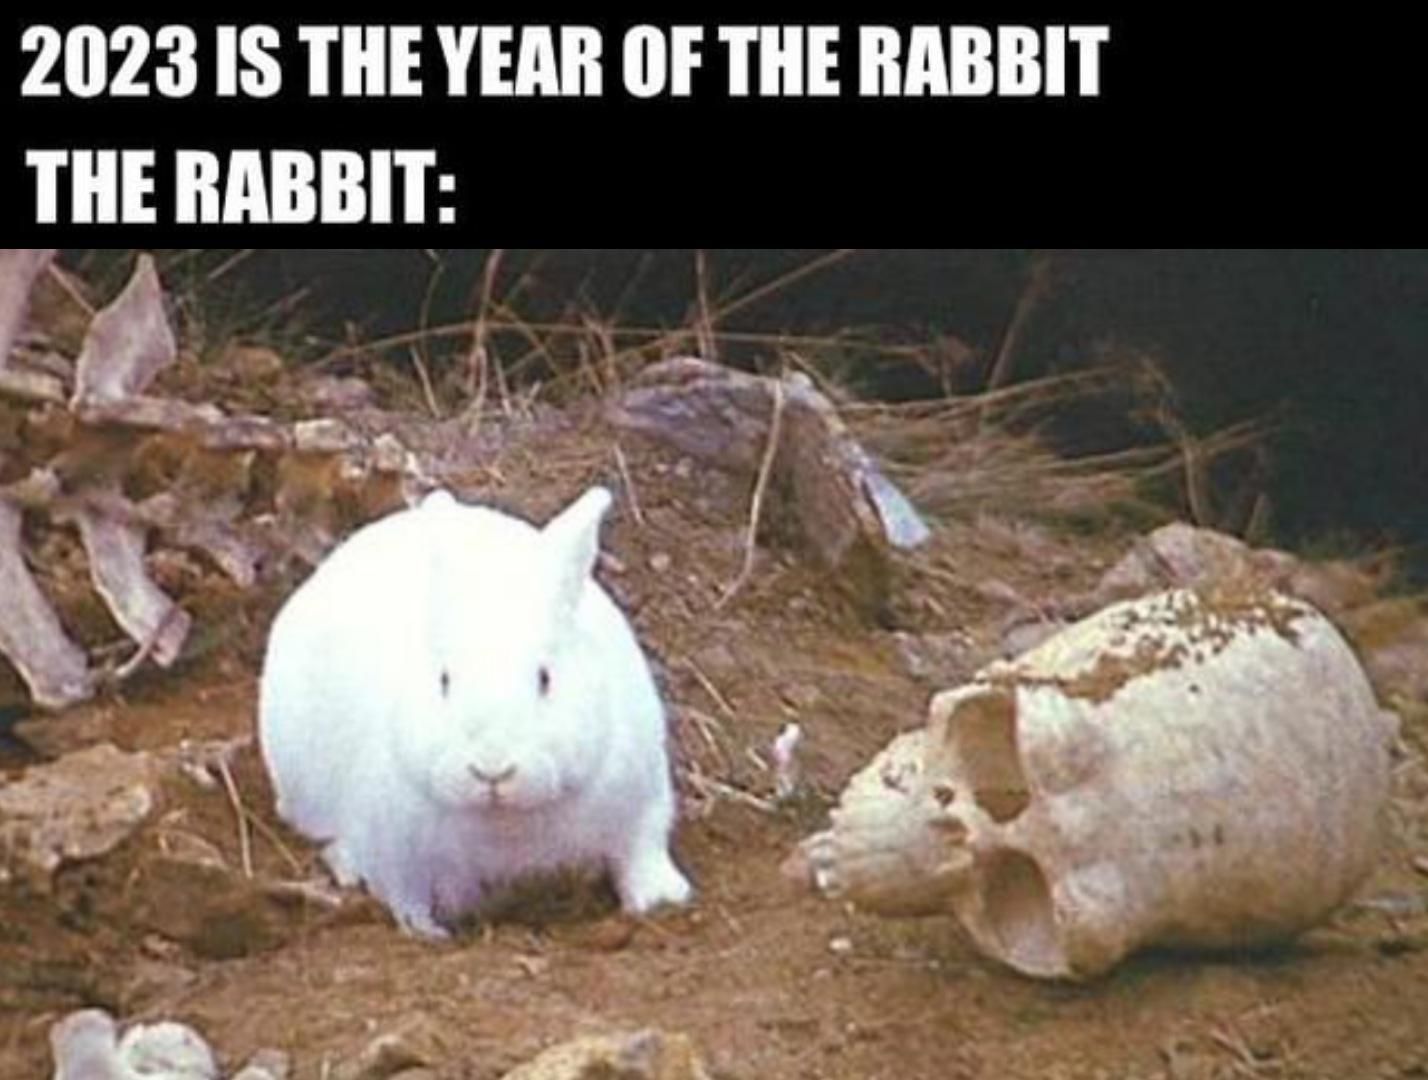 Oh, it's just a harmless little bunny, isn't it?